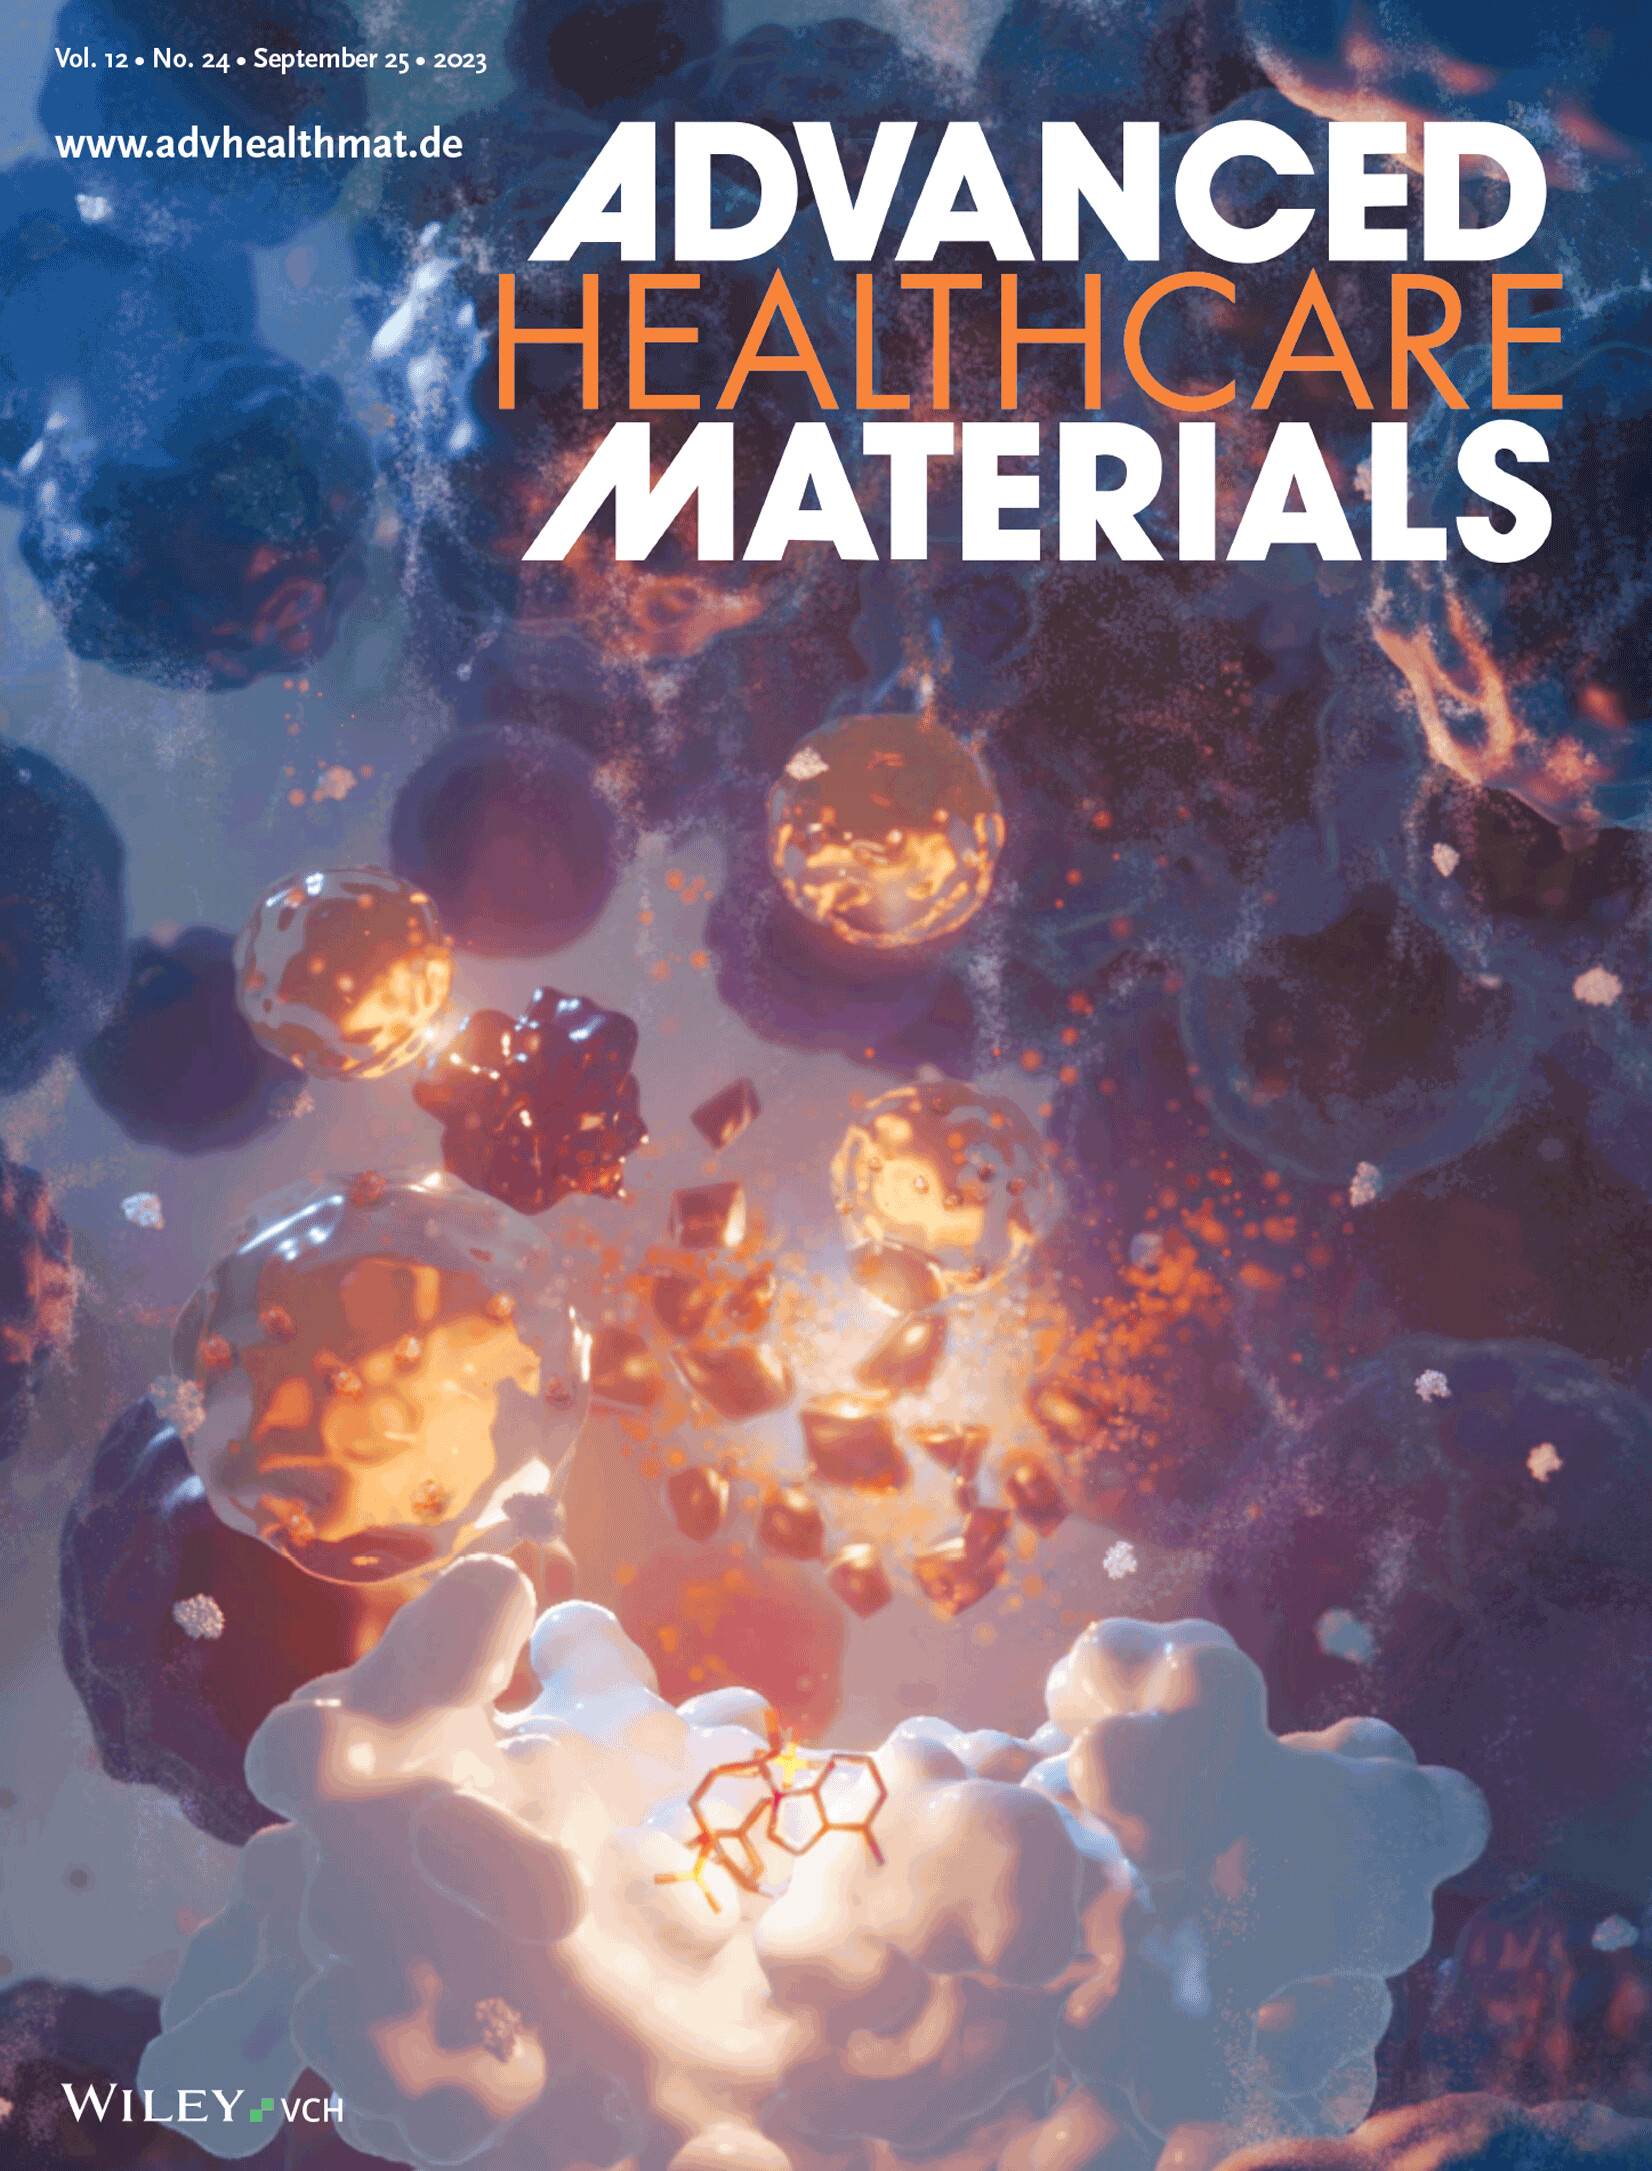 Decorative cover showing immunotherapy in action for the journal Advanced Healthcare Materials.